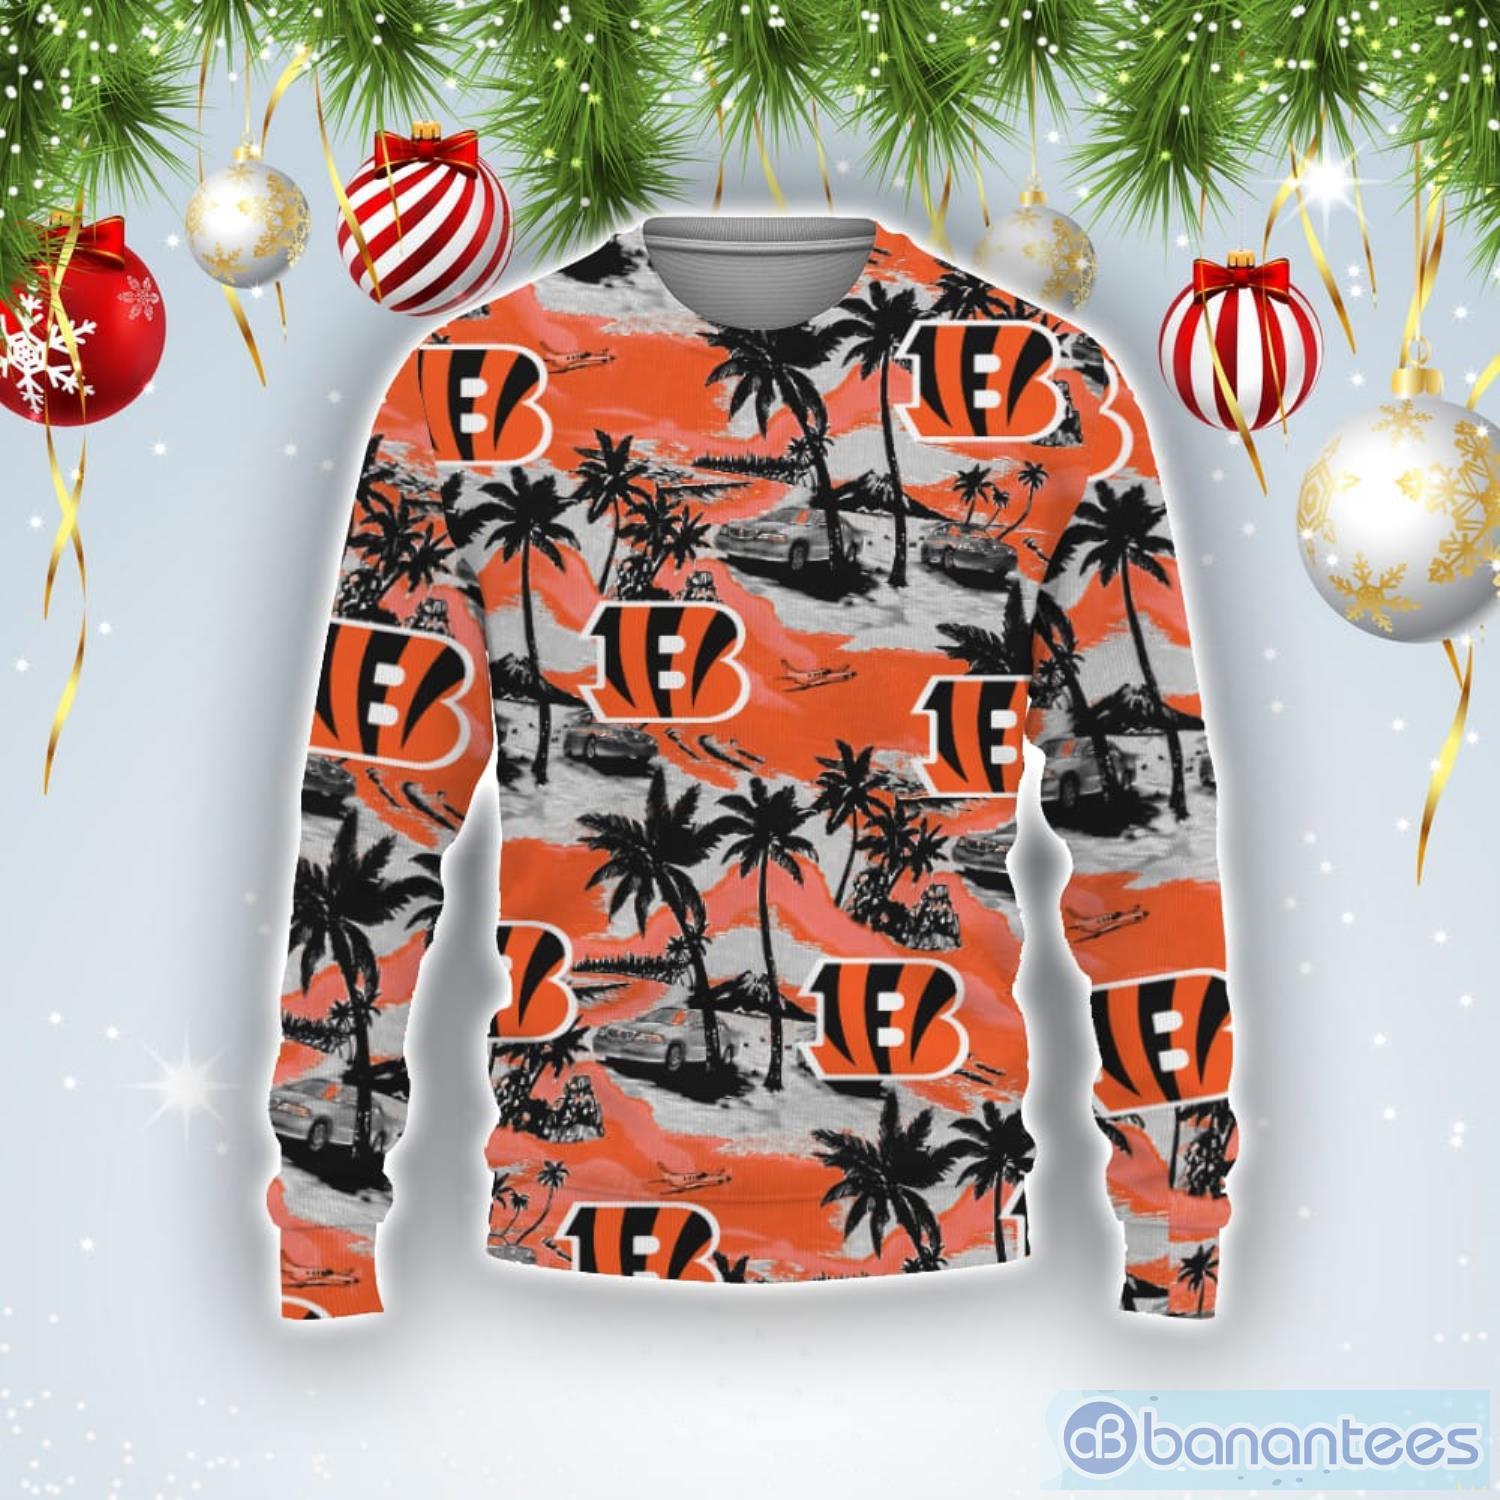 Cincinnati Bengals Tropical Patterns For Fans Sweater Product Photo 1